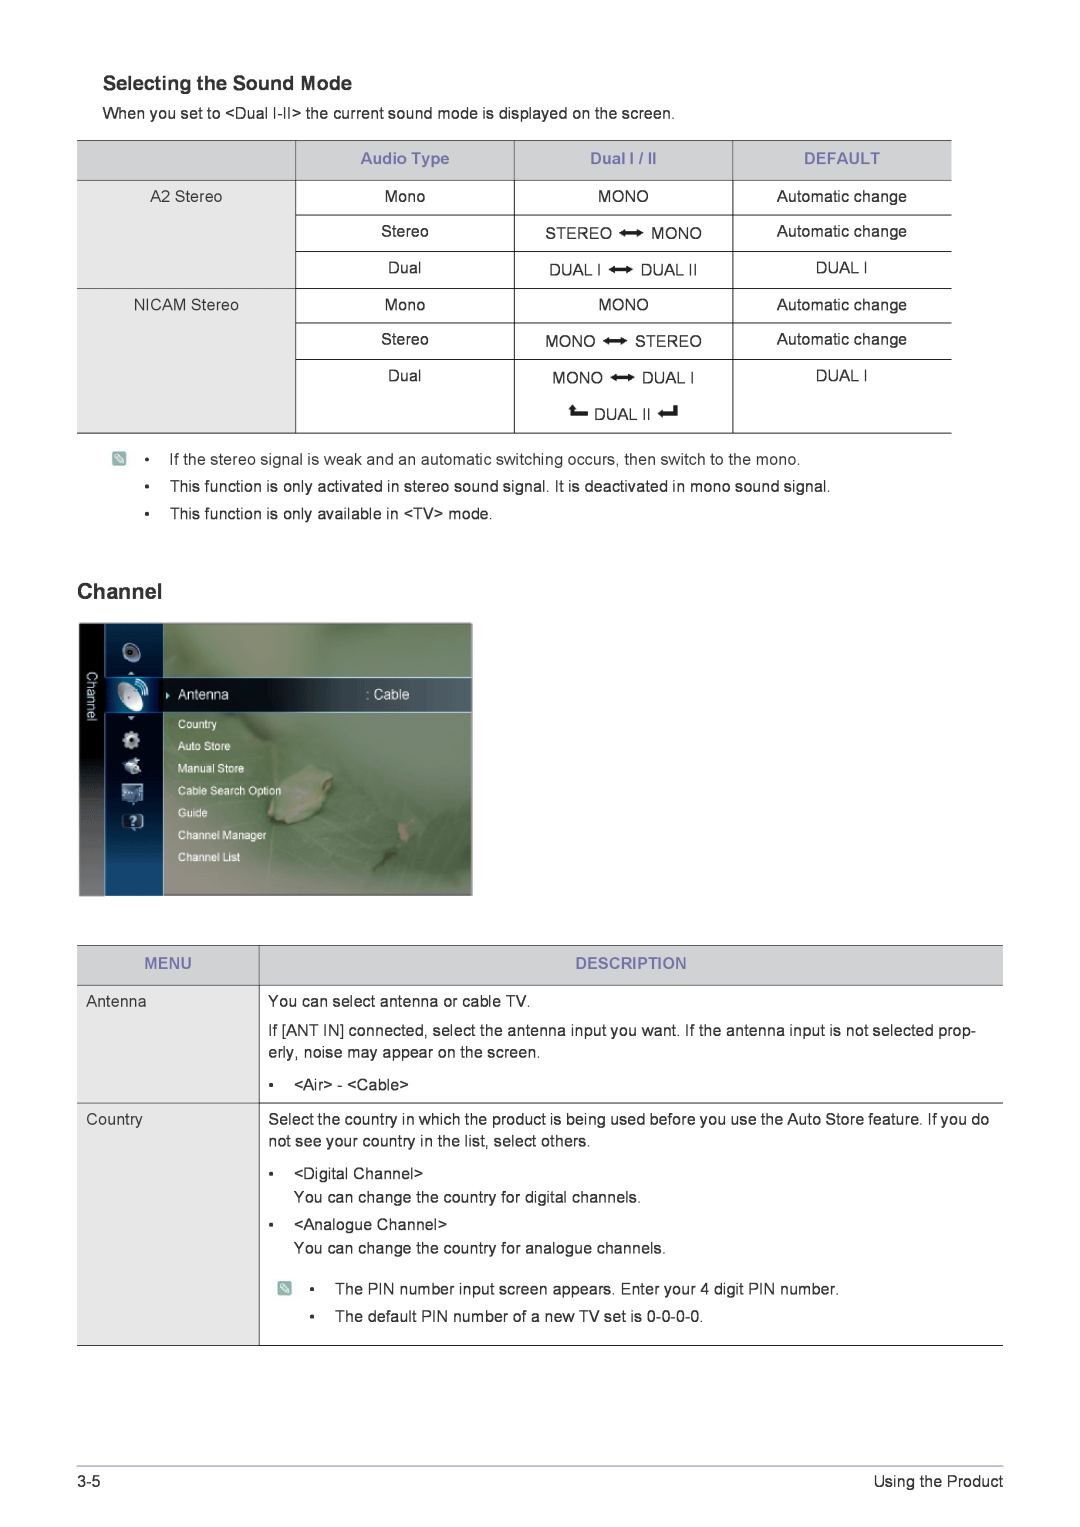 Samsung B2030HD, B2330HD, B2430HD, B1930HD, B2230HD user manual Channel, Selecting the Sound Mode 